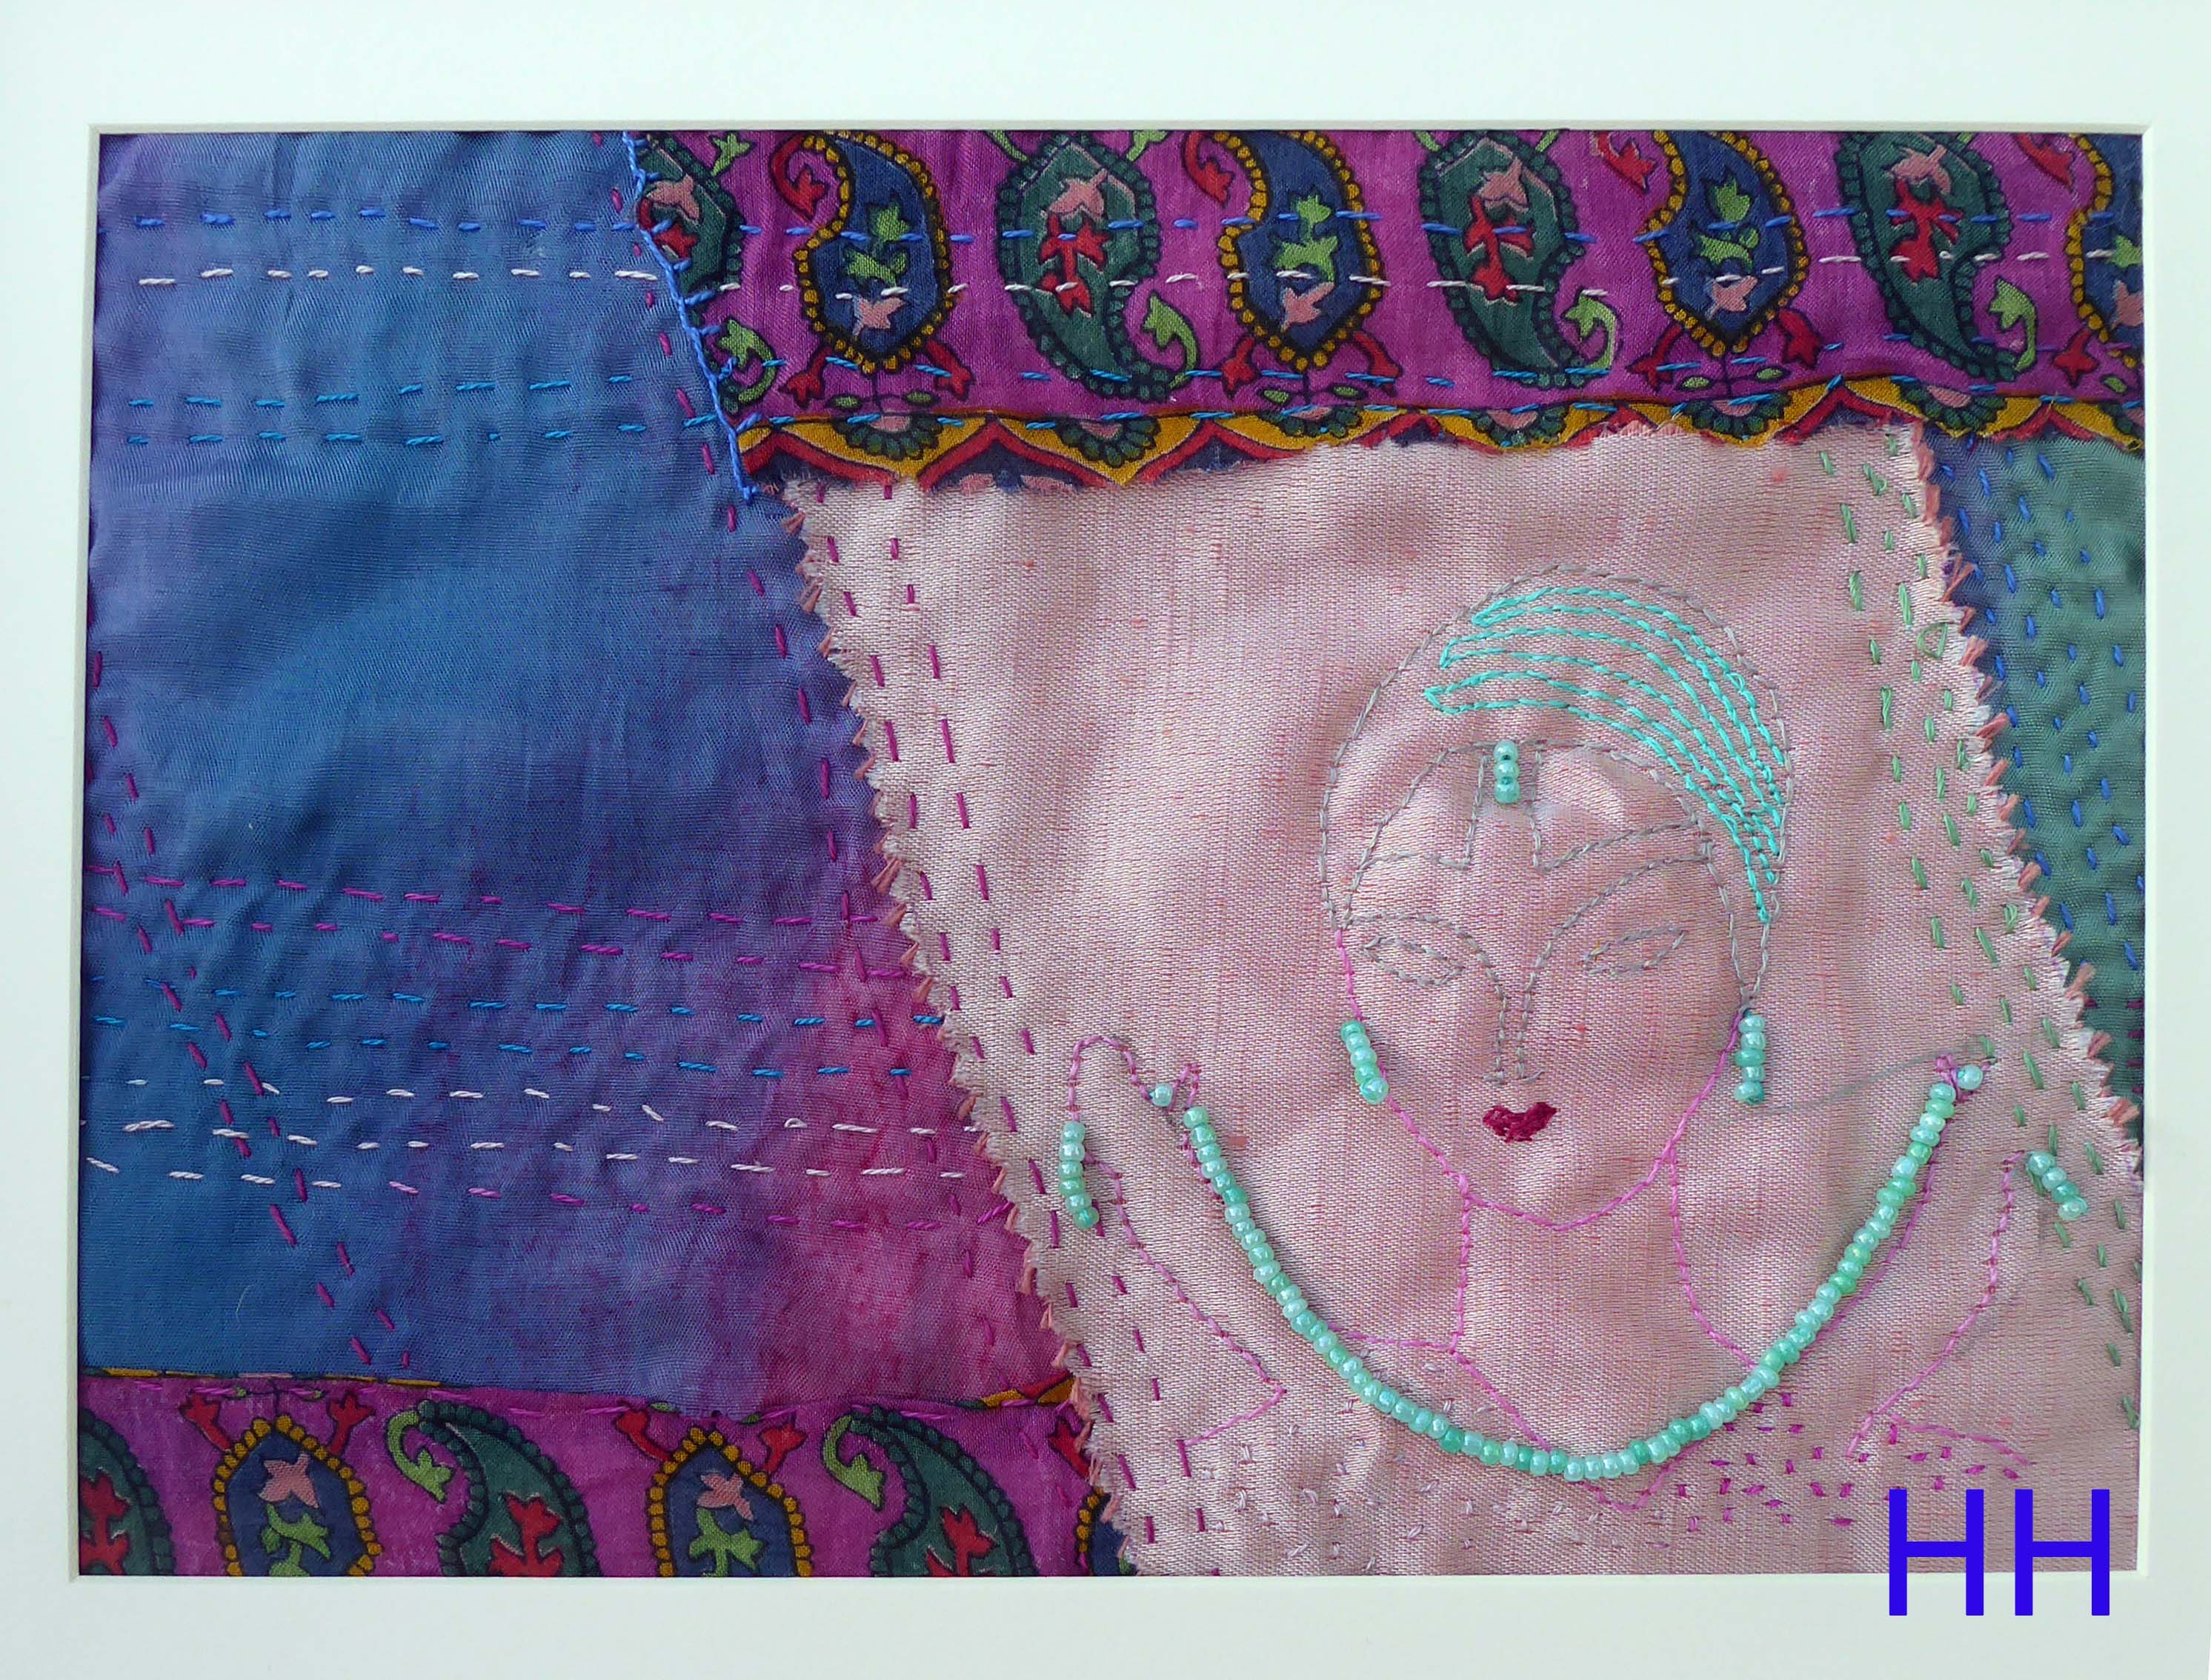 VOGUE, using design from 1927 as inspiration, hand embroidery with added beads, Aurifil competition 2021